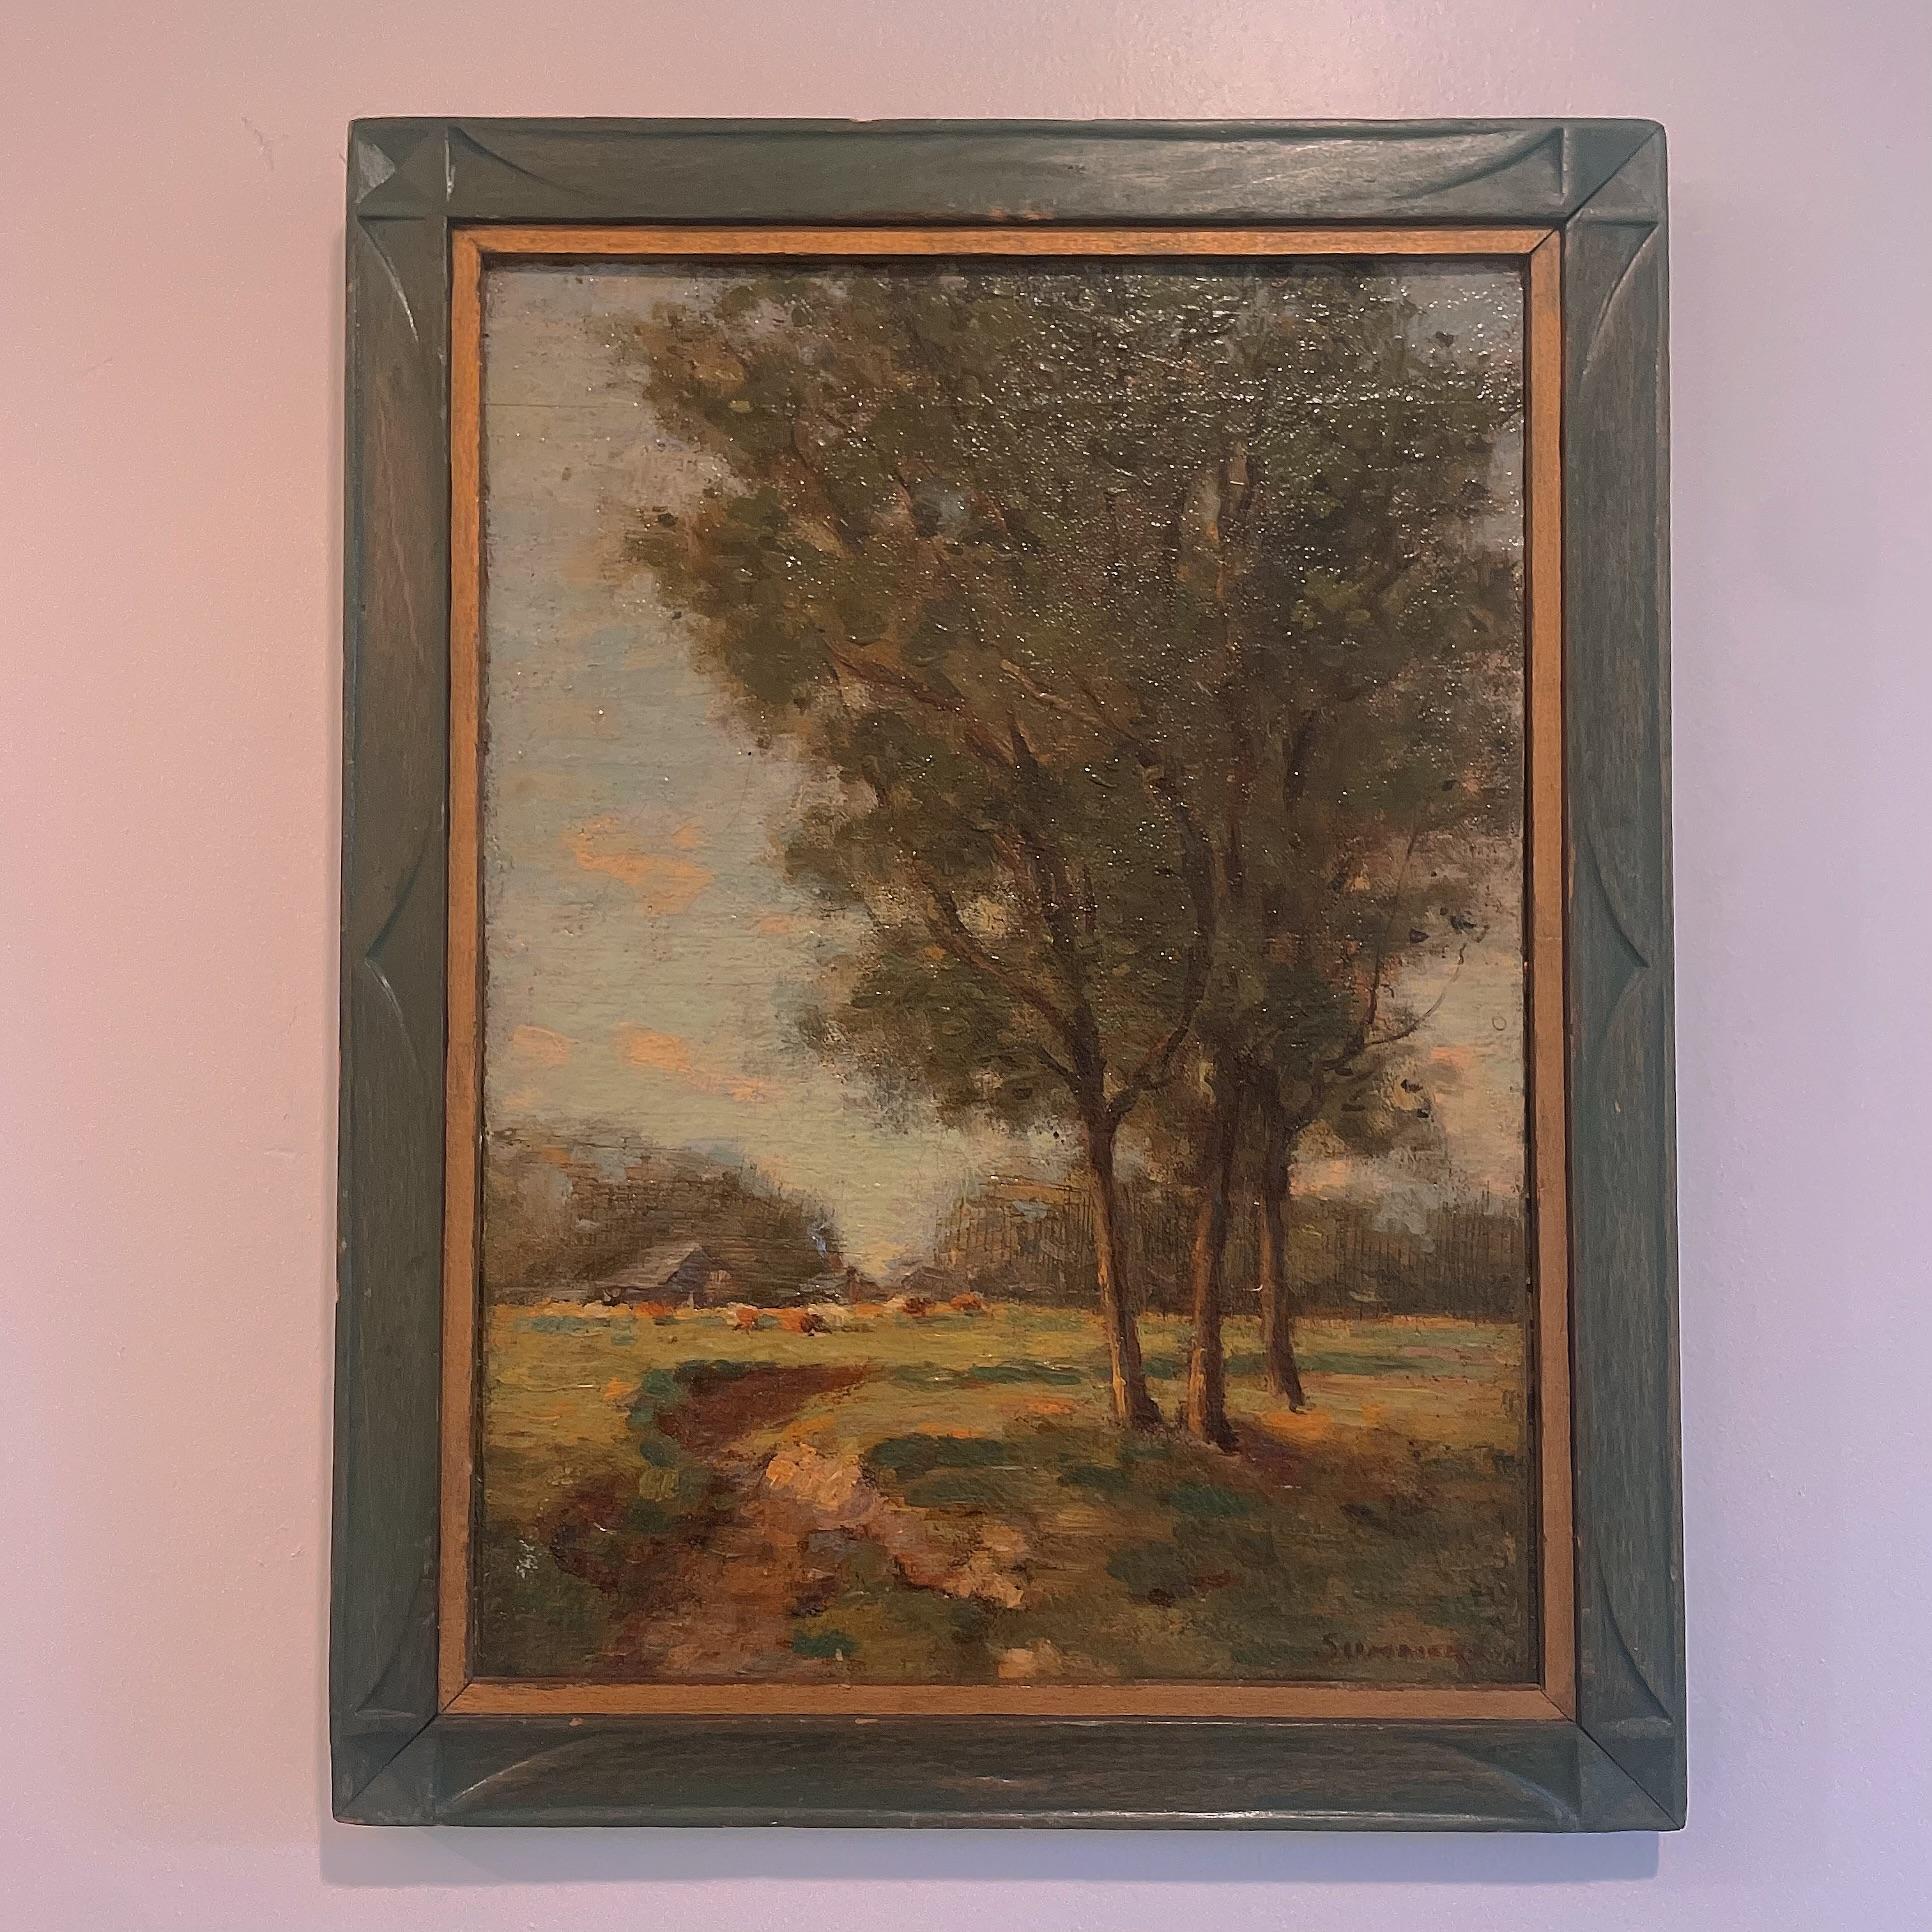 Vintage Landscape Original Oil Signed Summers - Attributed to Ivan Summers (American 1889-1964), Early Work, American Impressionist Artist Oil on Canvas Laid to Board. 

IVAN SUMMERS, 1889-1964, was an important American Impressionist artist whose 